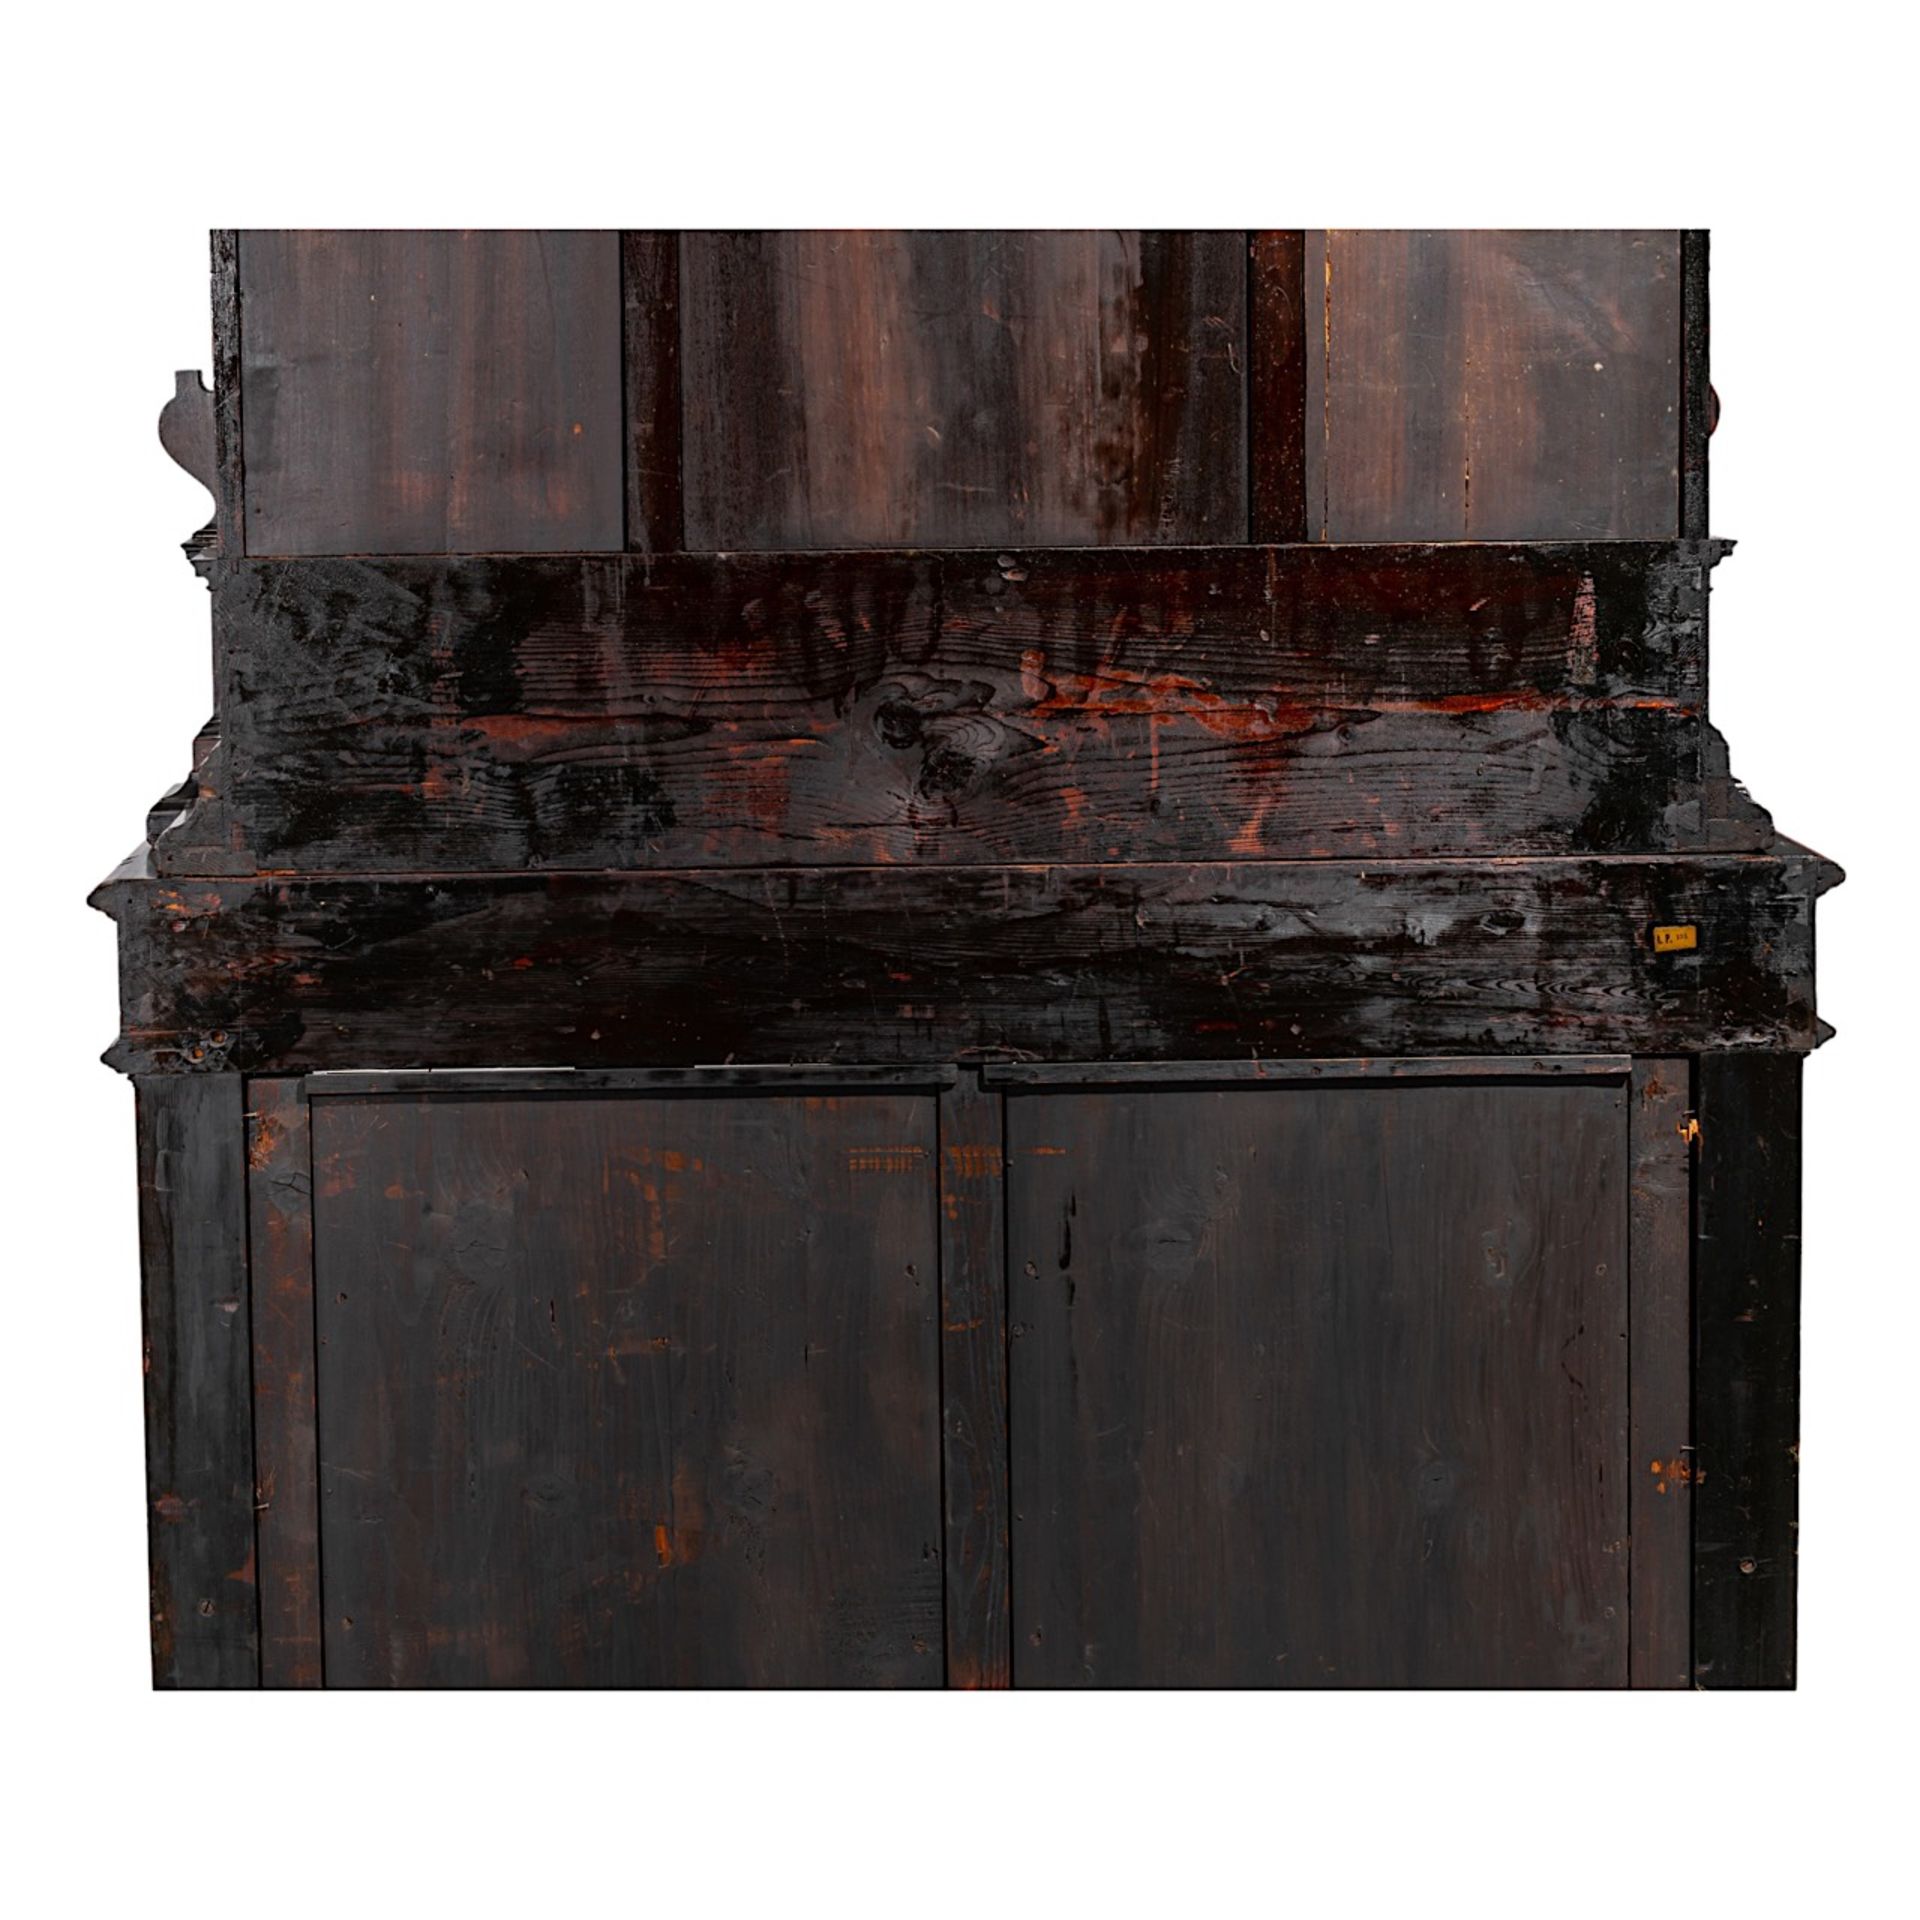 PREMIUM LOT - An impressive and exceptional 19thC architecturally designed baroque cabinet veneered - Image 22 of 24